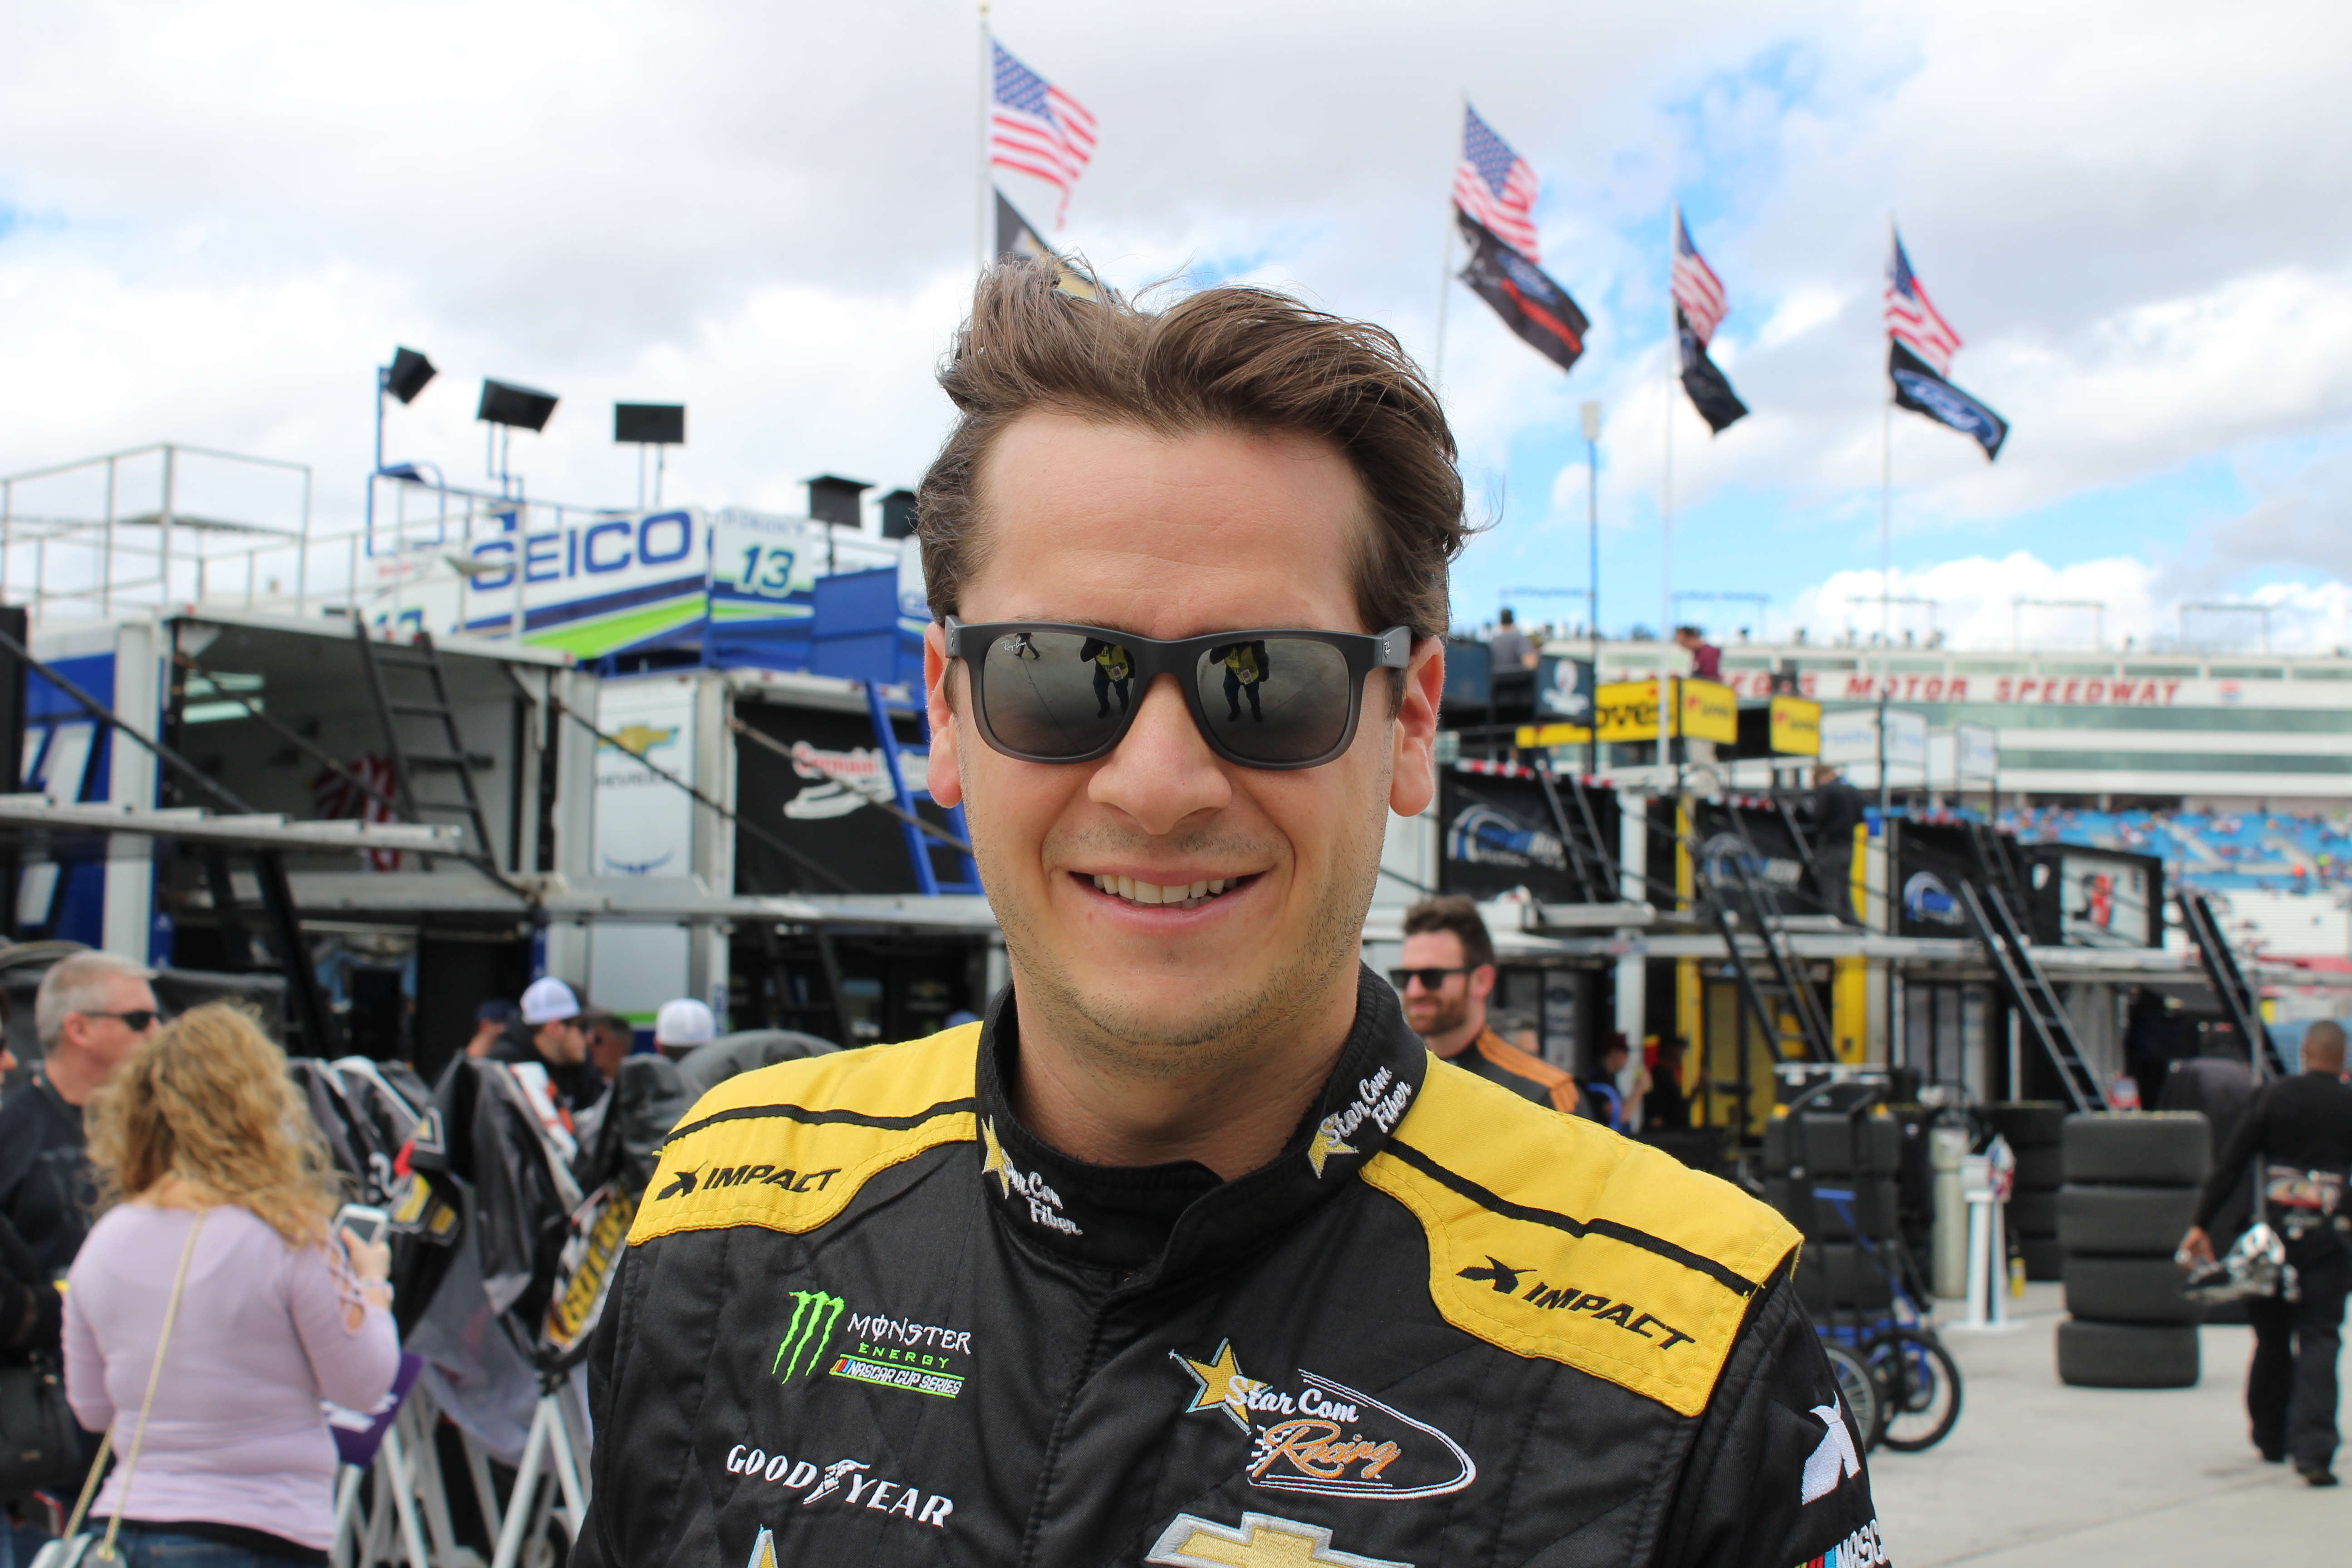 From Las Vegas to Phoenix, a now short haired Landon Cassill stops by for his monthly column! (Photo Credit: Jose L. Acero Jr./TPF)